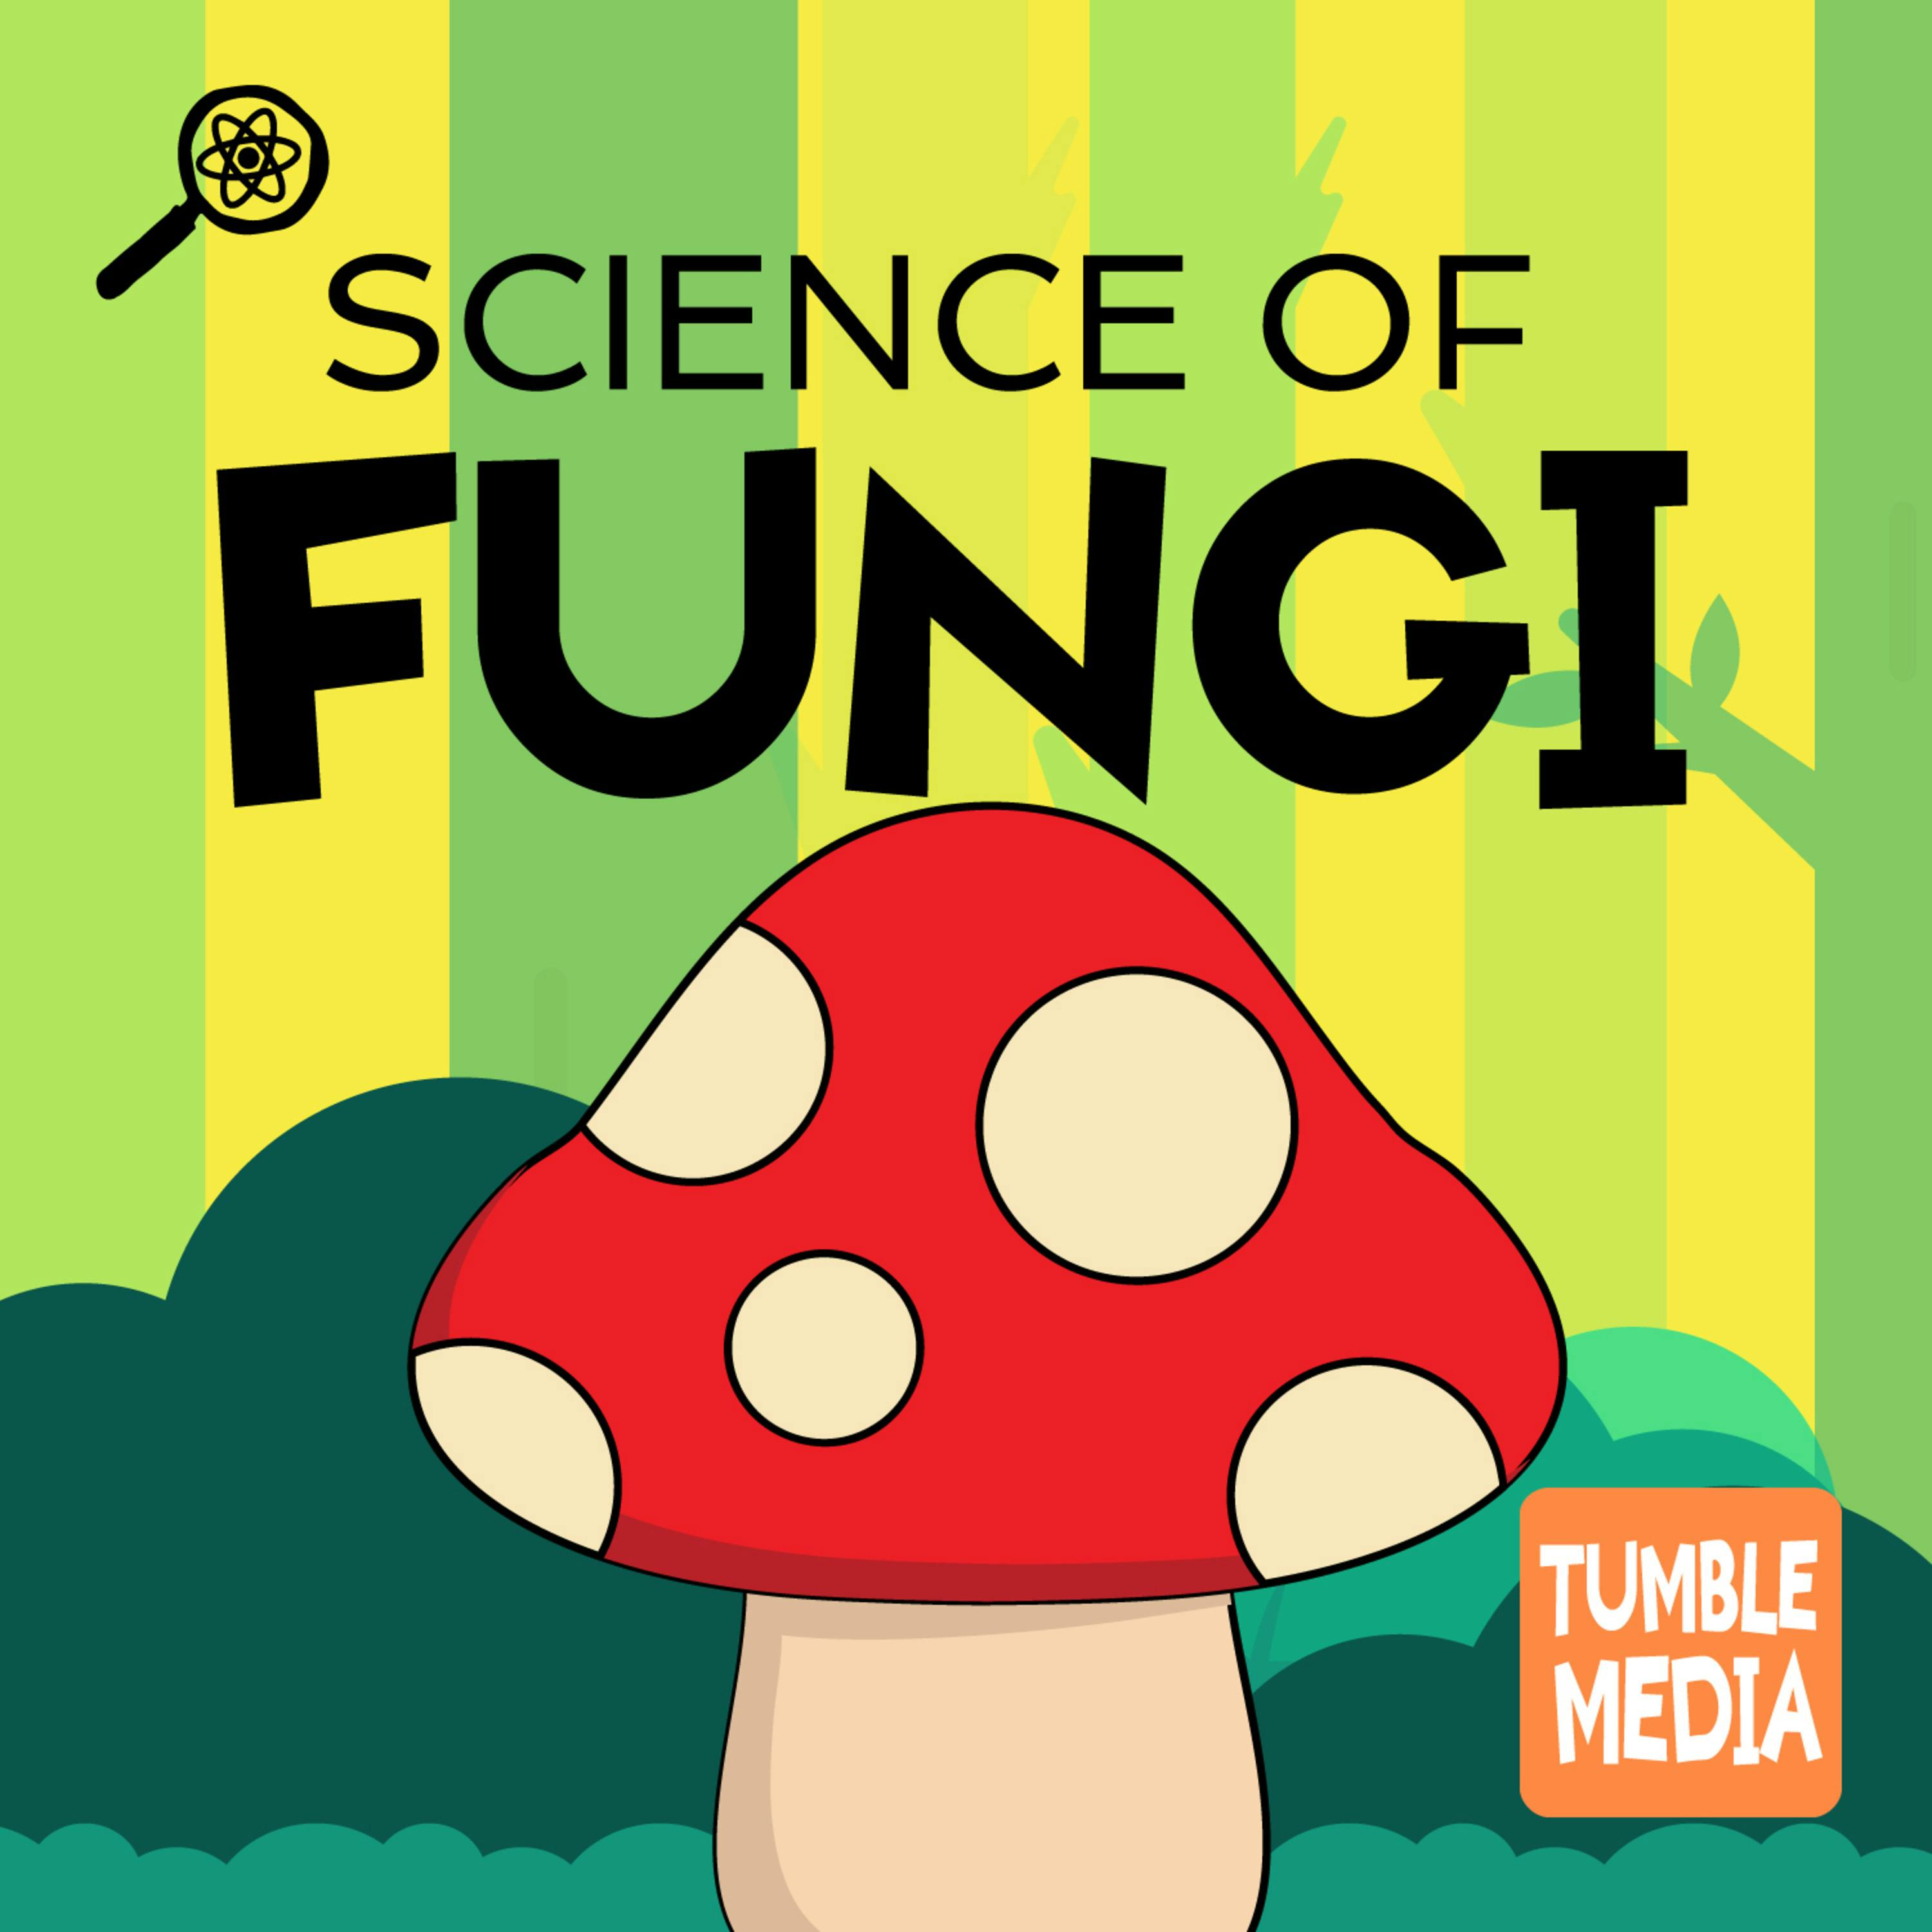 The Science of Fungi